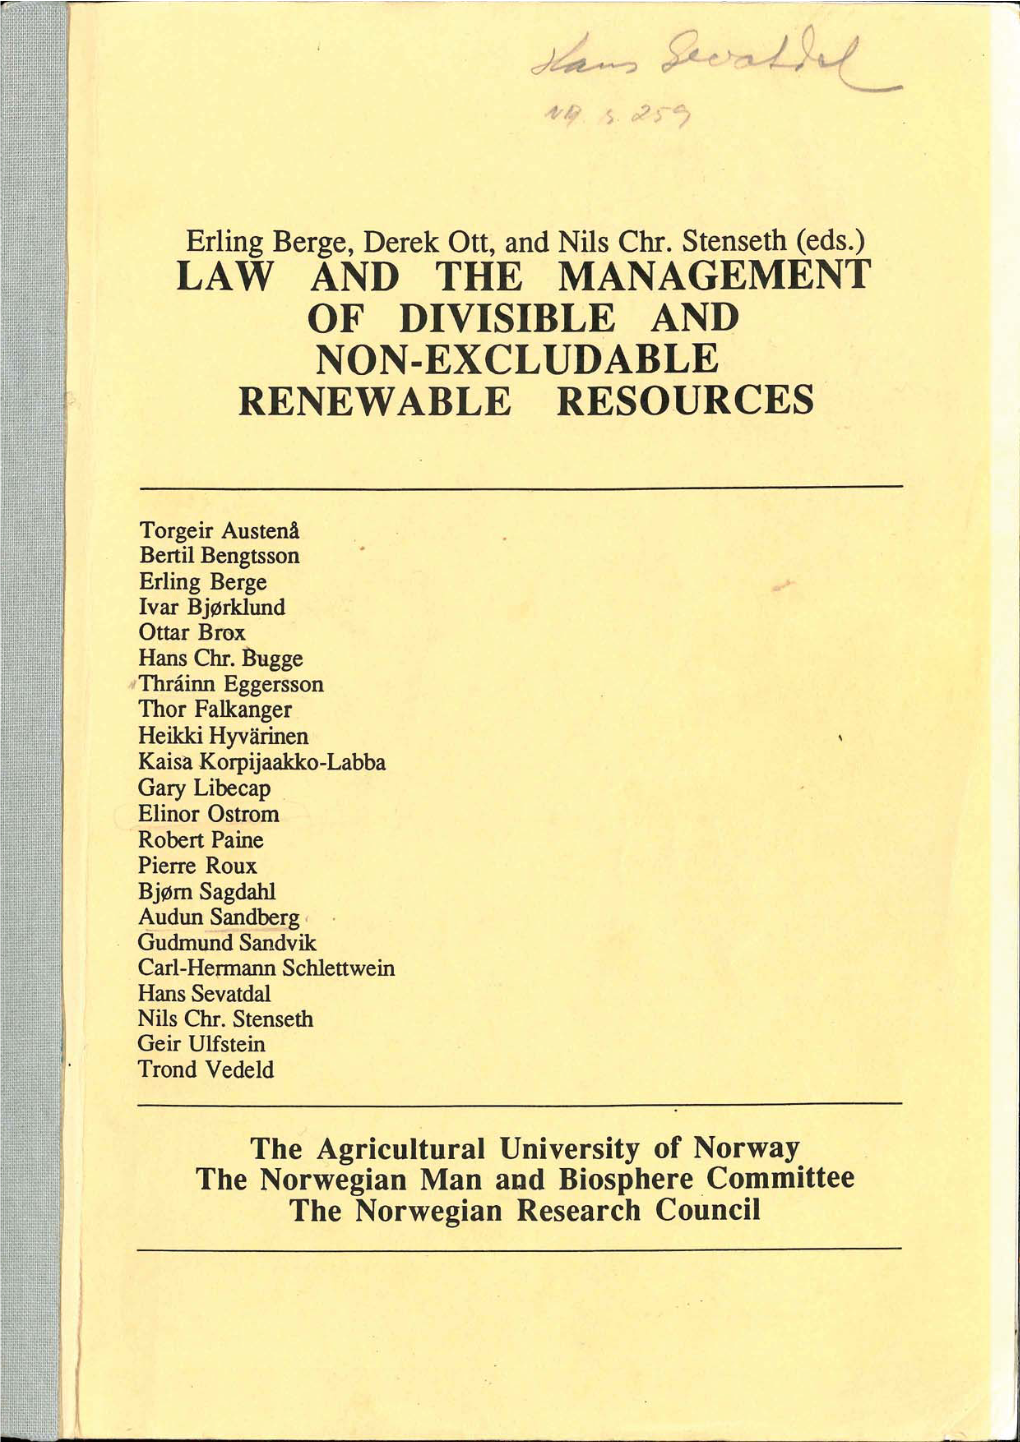 Law and the Management of Divisible and Non-Excludable Renewable Resources ______